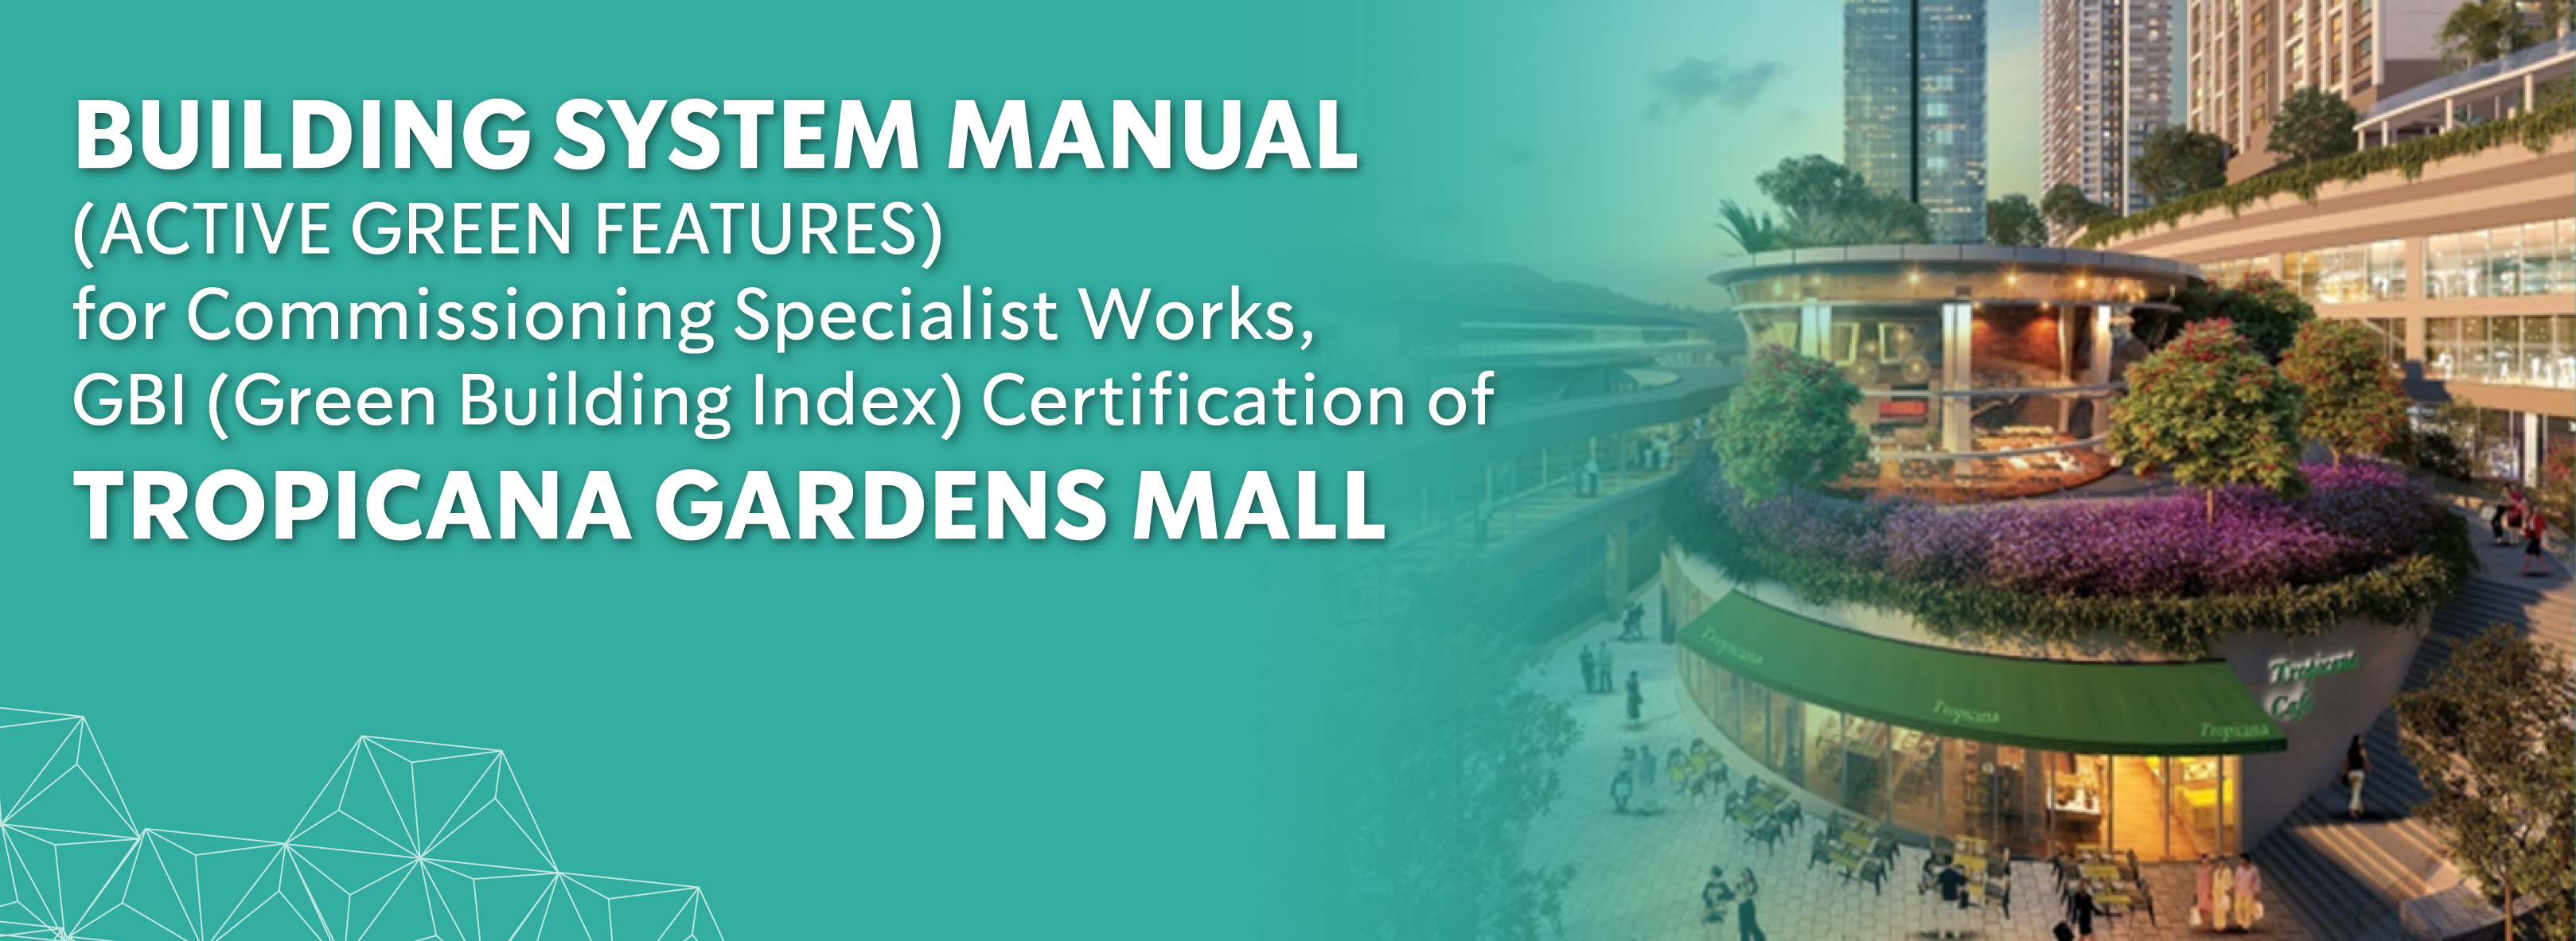 Tropicana Gardens Mall Building System Manual (Active Green Features) for Commisioning Specialist Works, GBI (Green Building Index) Certification of Tropicana Gardens Mall